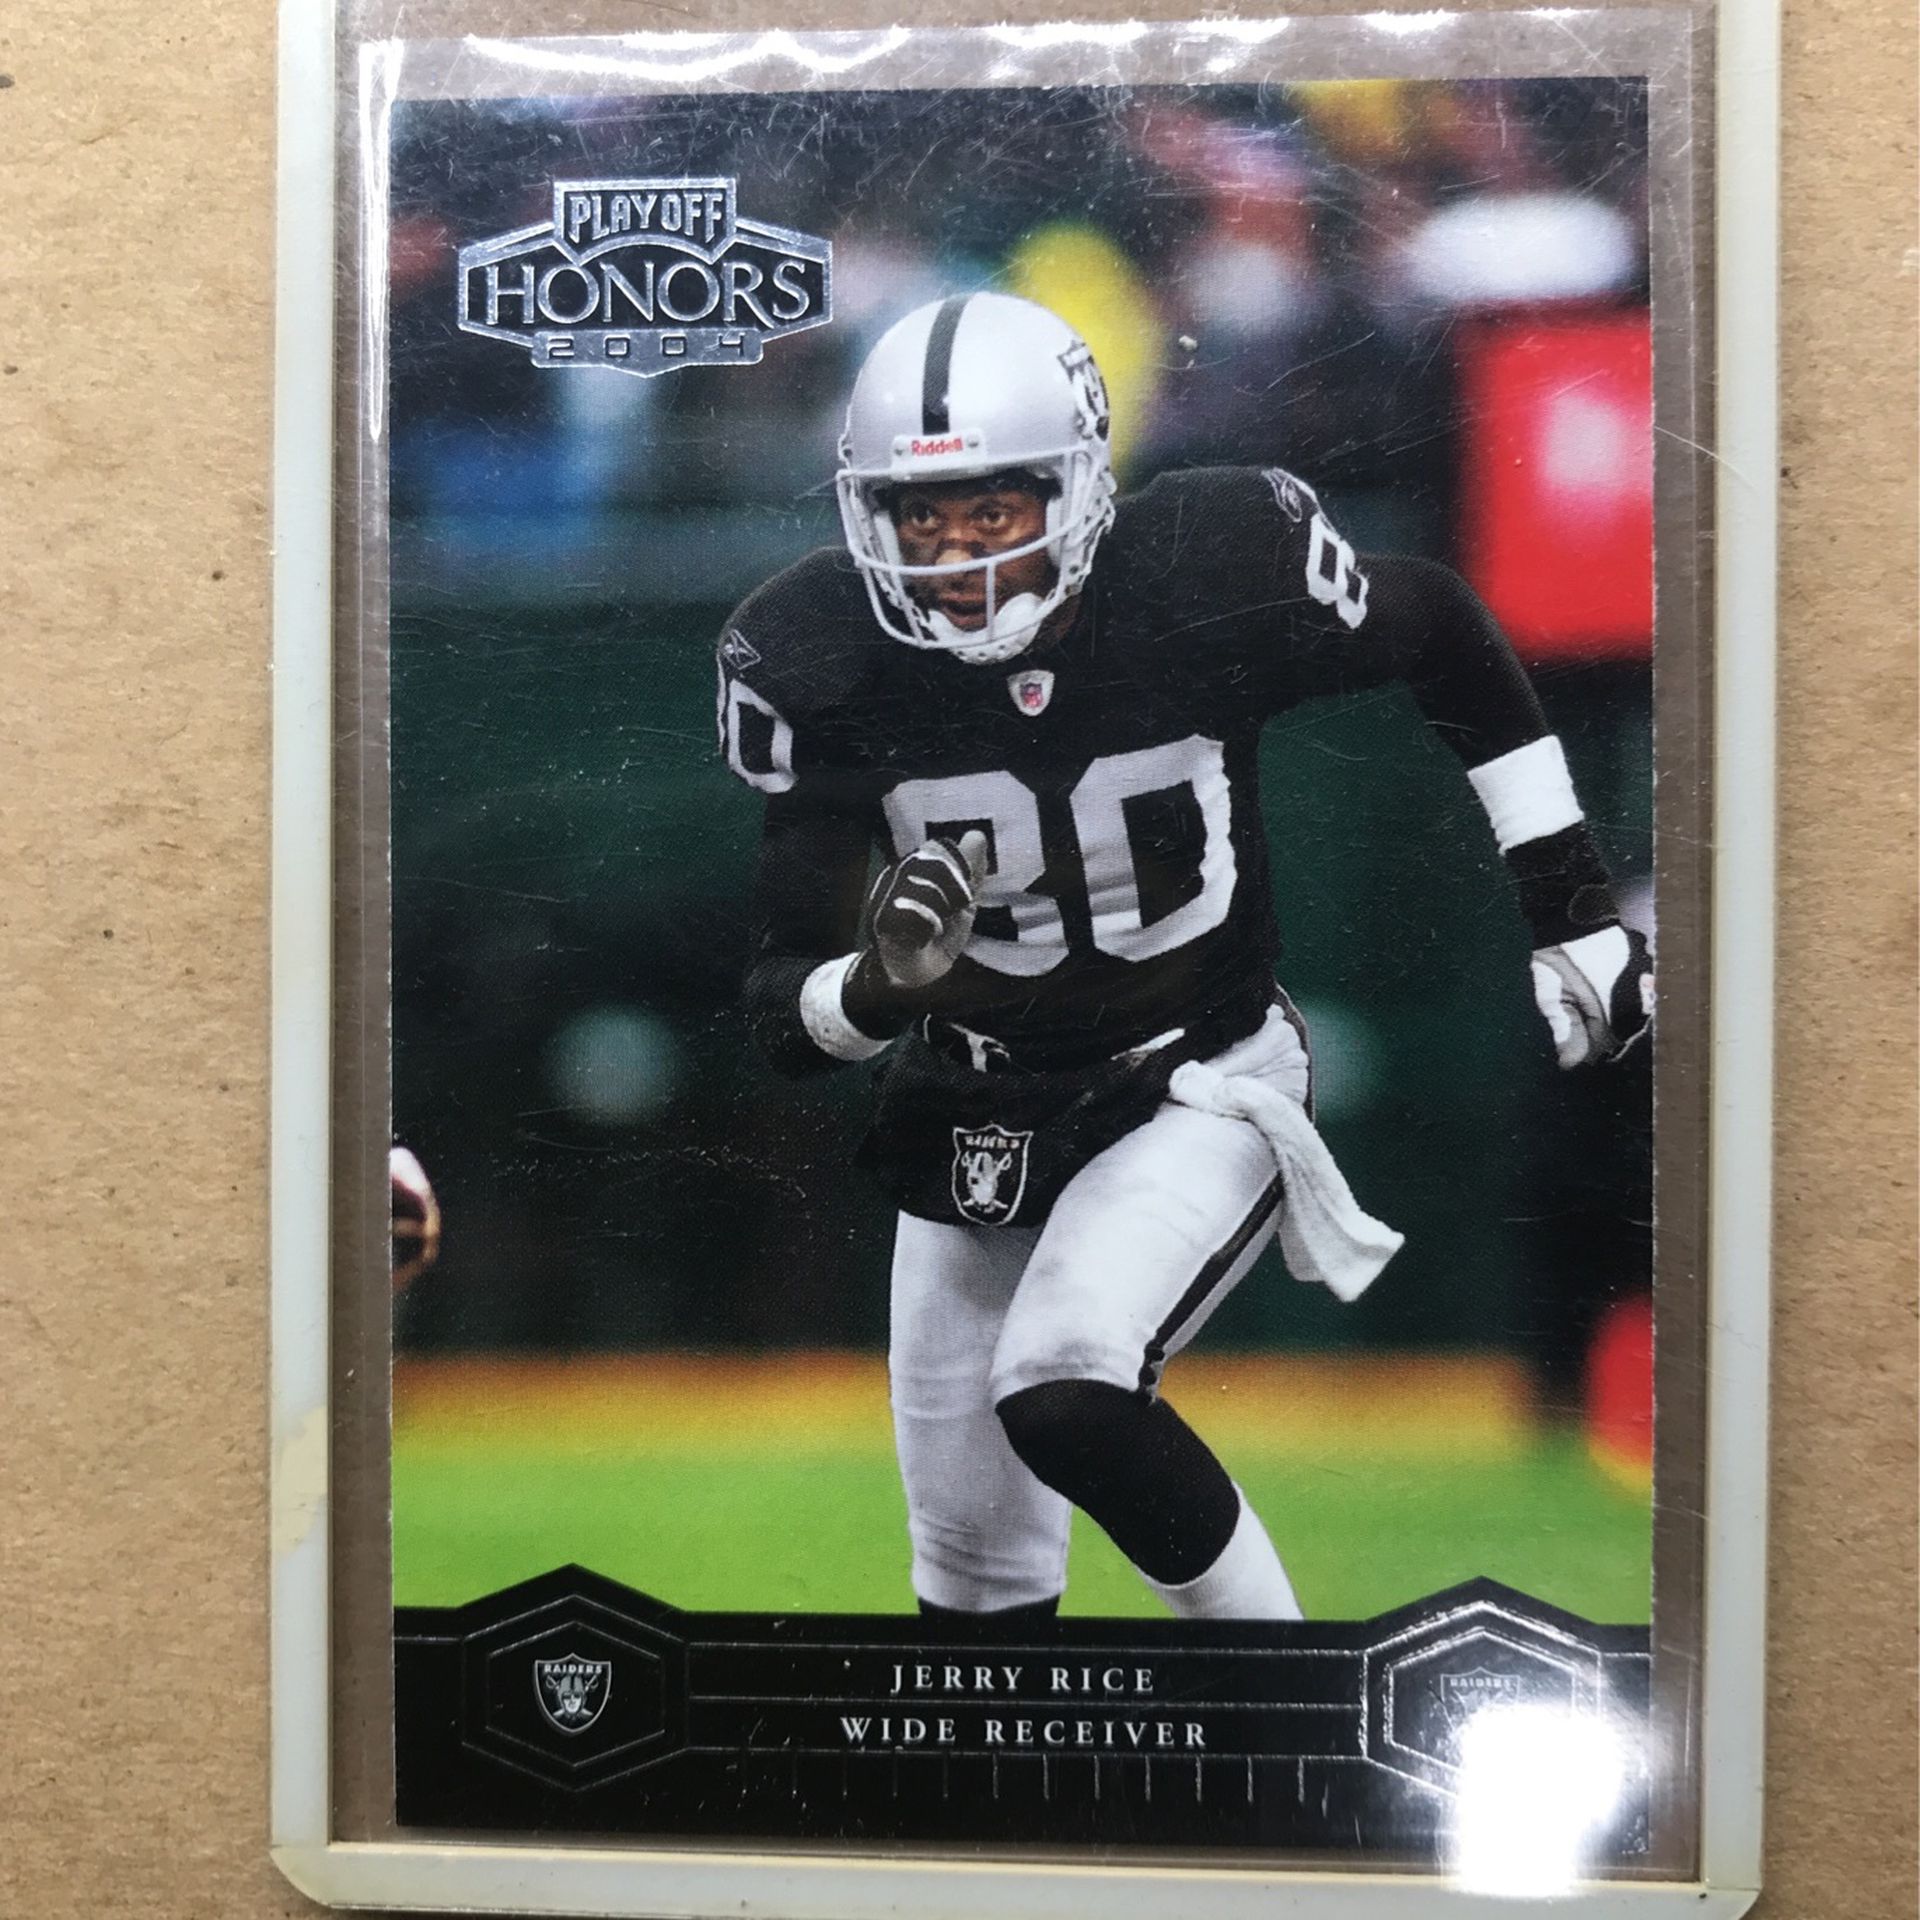 JERRY RICE (Playoff Honors) 2004 Oakland Raiders